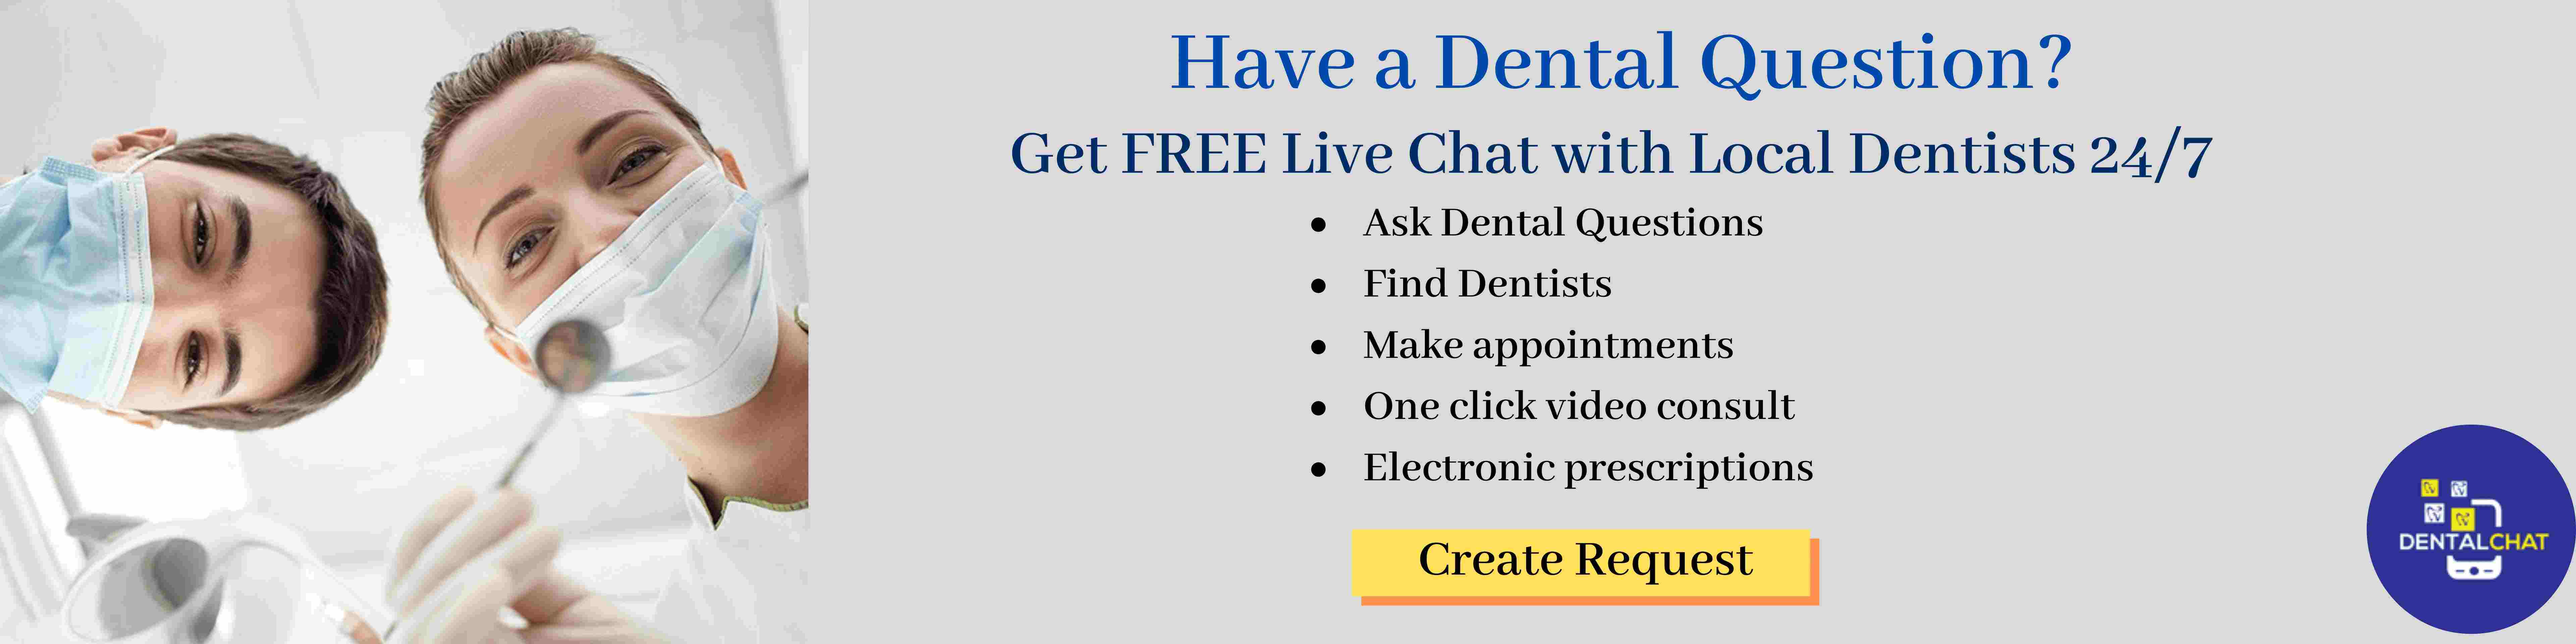 Online Dentist Chat about Dental Treatment Costs Questions - Average Dental procedure costs in USA